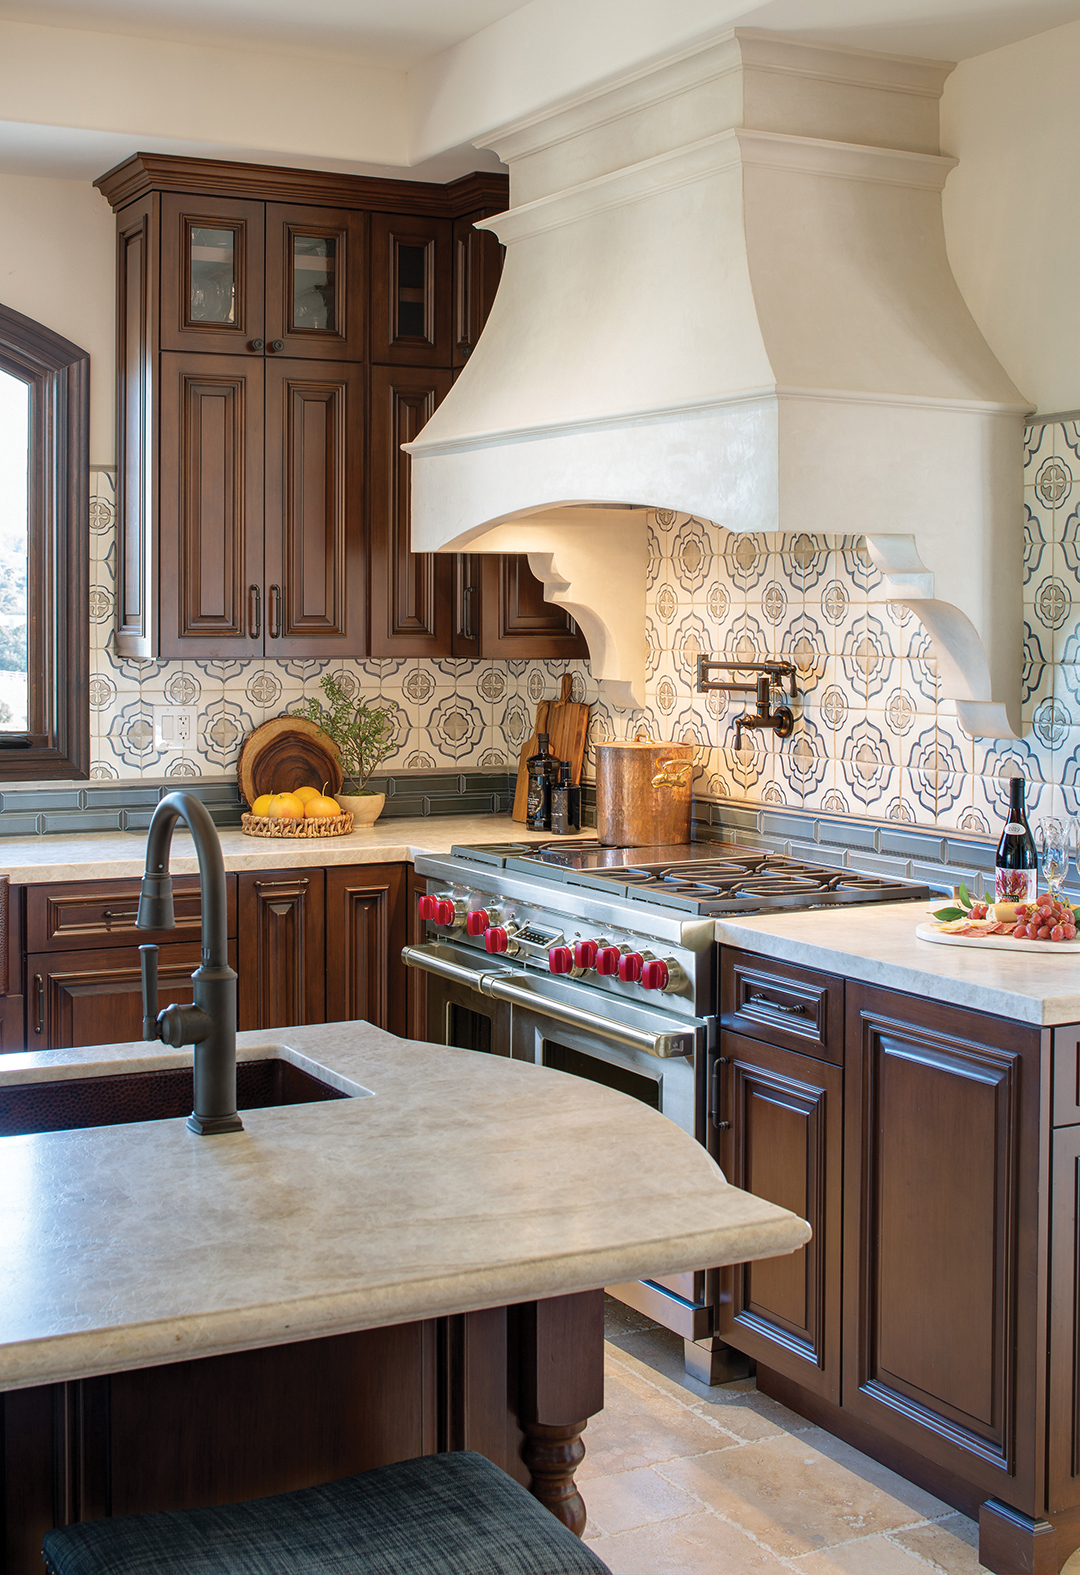 Counters are in honed Taj Mahal quartzite with a backsplash of hand-painted terra cotta tiles